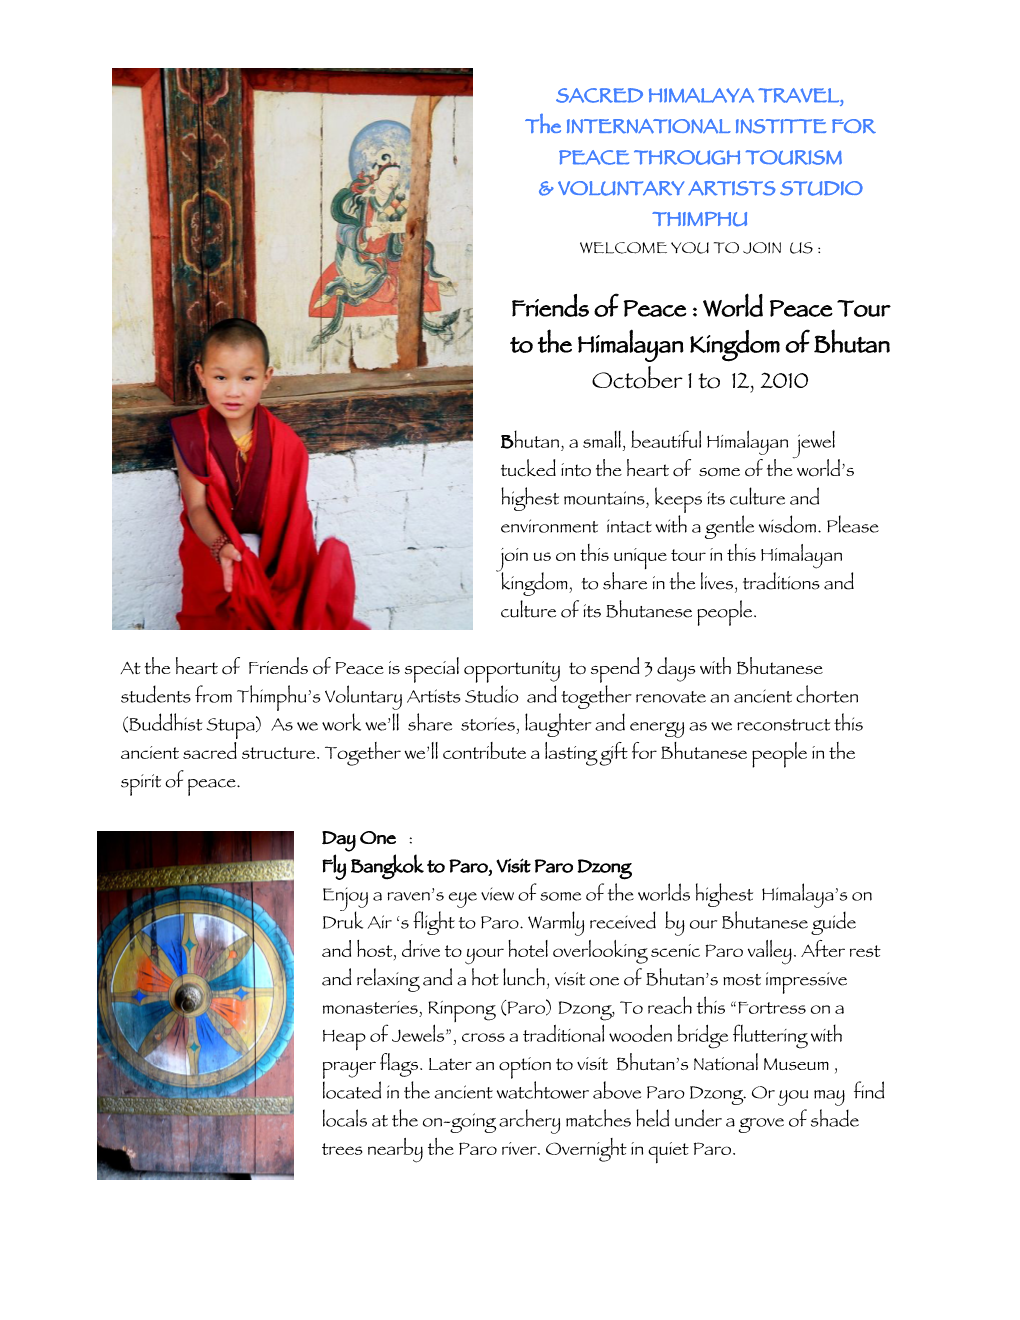 Friends of Peace : World Peace Tour to the Himalayan Kingdom of Bhutan October 1 to 12, 2010